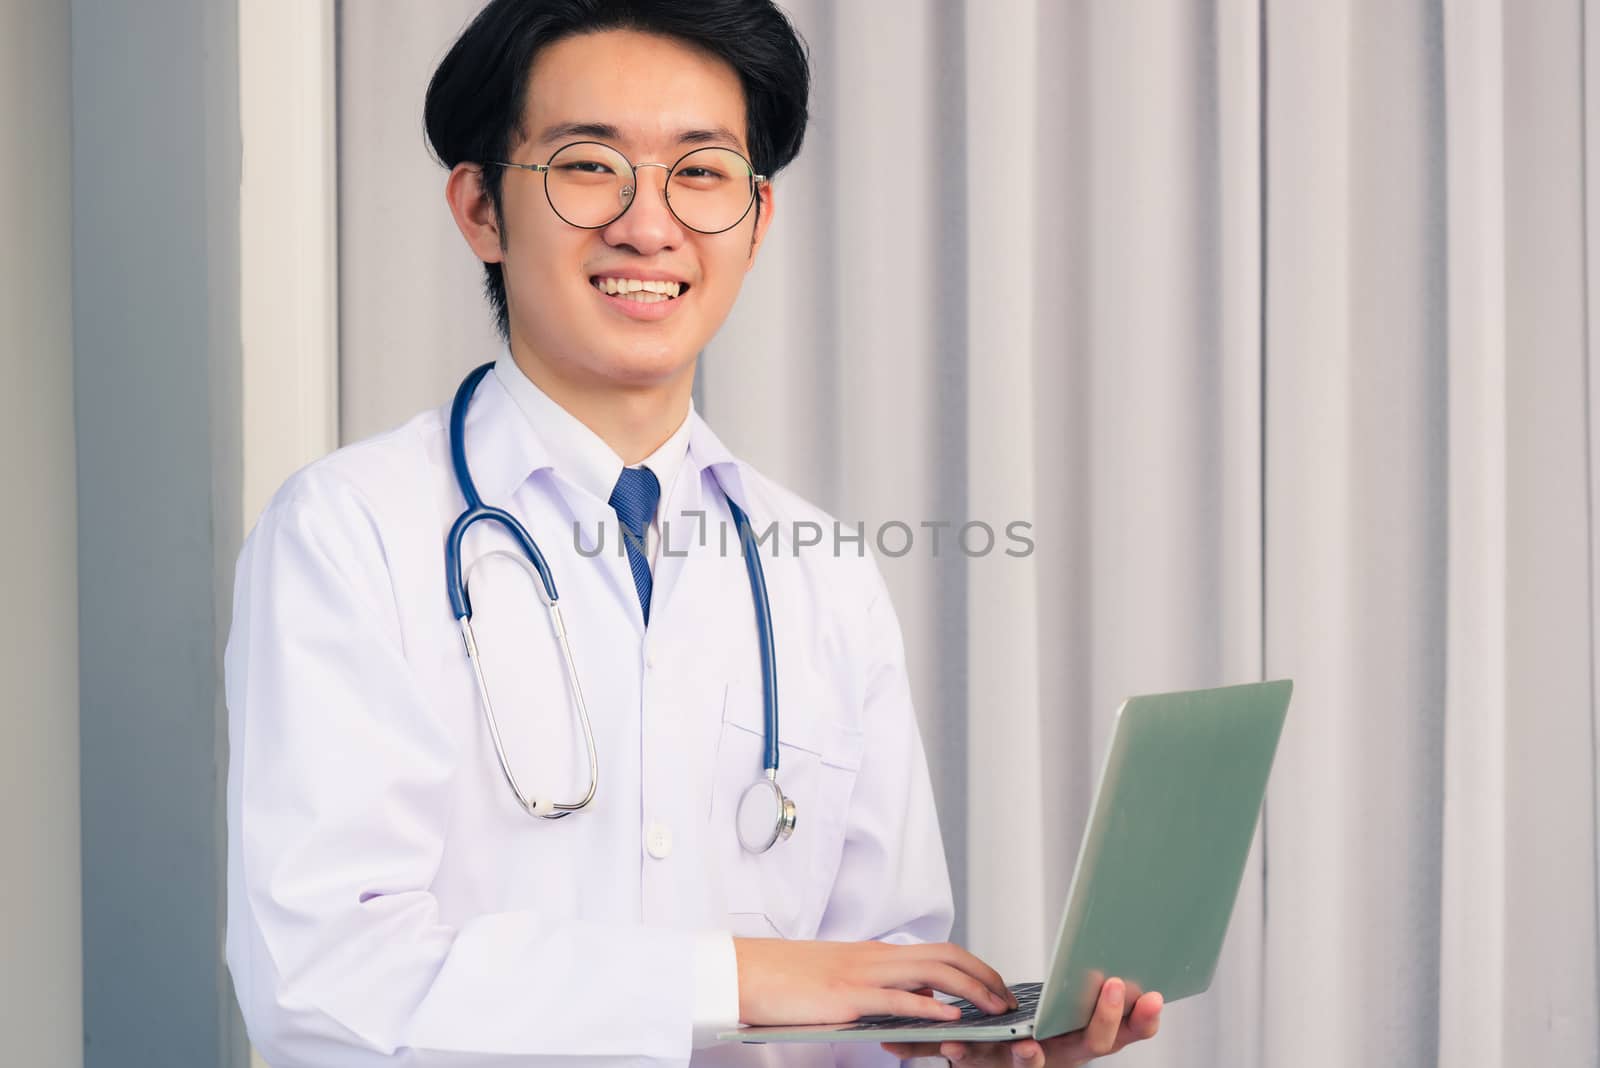 Portrait of Asian young handsome doctor man wearing a doctor's dress and stethoscope smiling sitting at hospital office, Health medical care concept